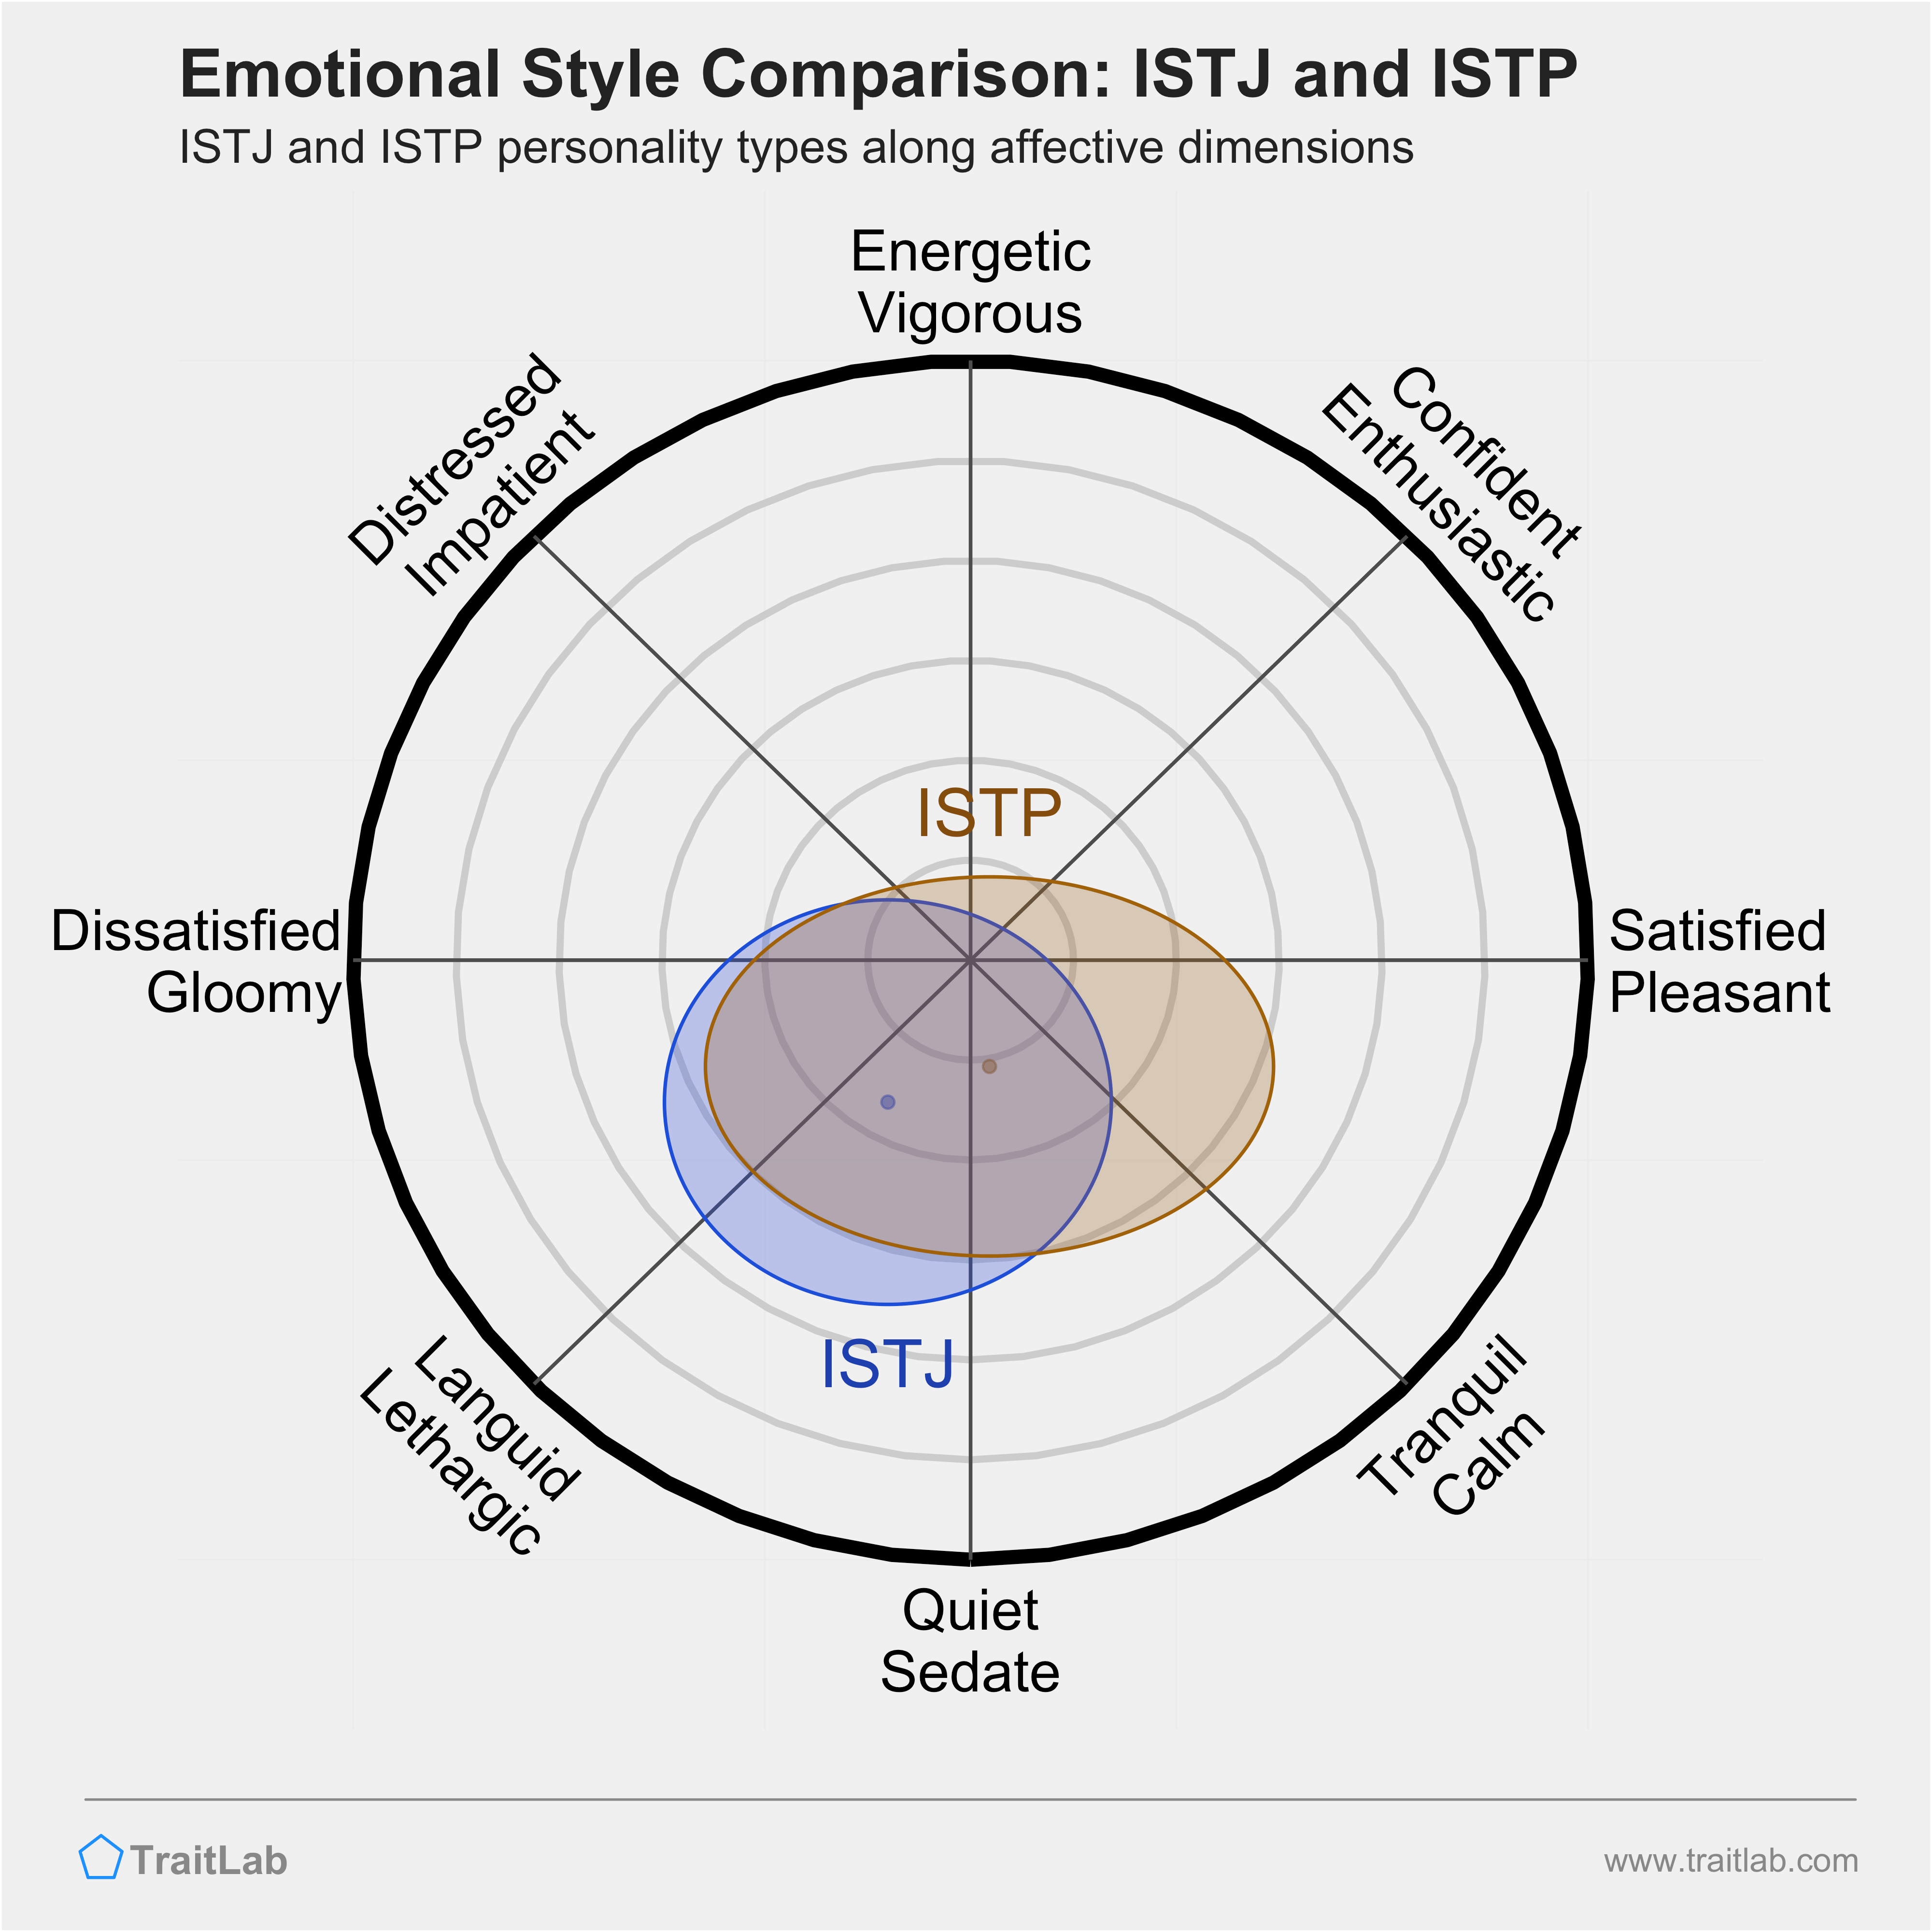 ISTJ and ISTP comparison across emotional (affective) dimensions